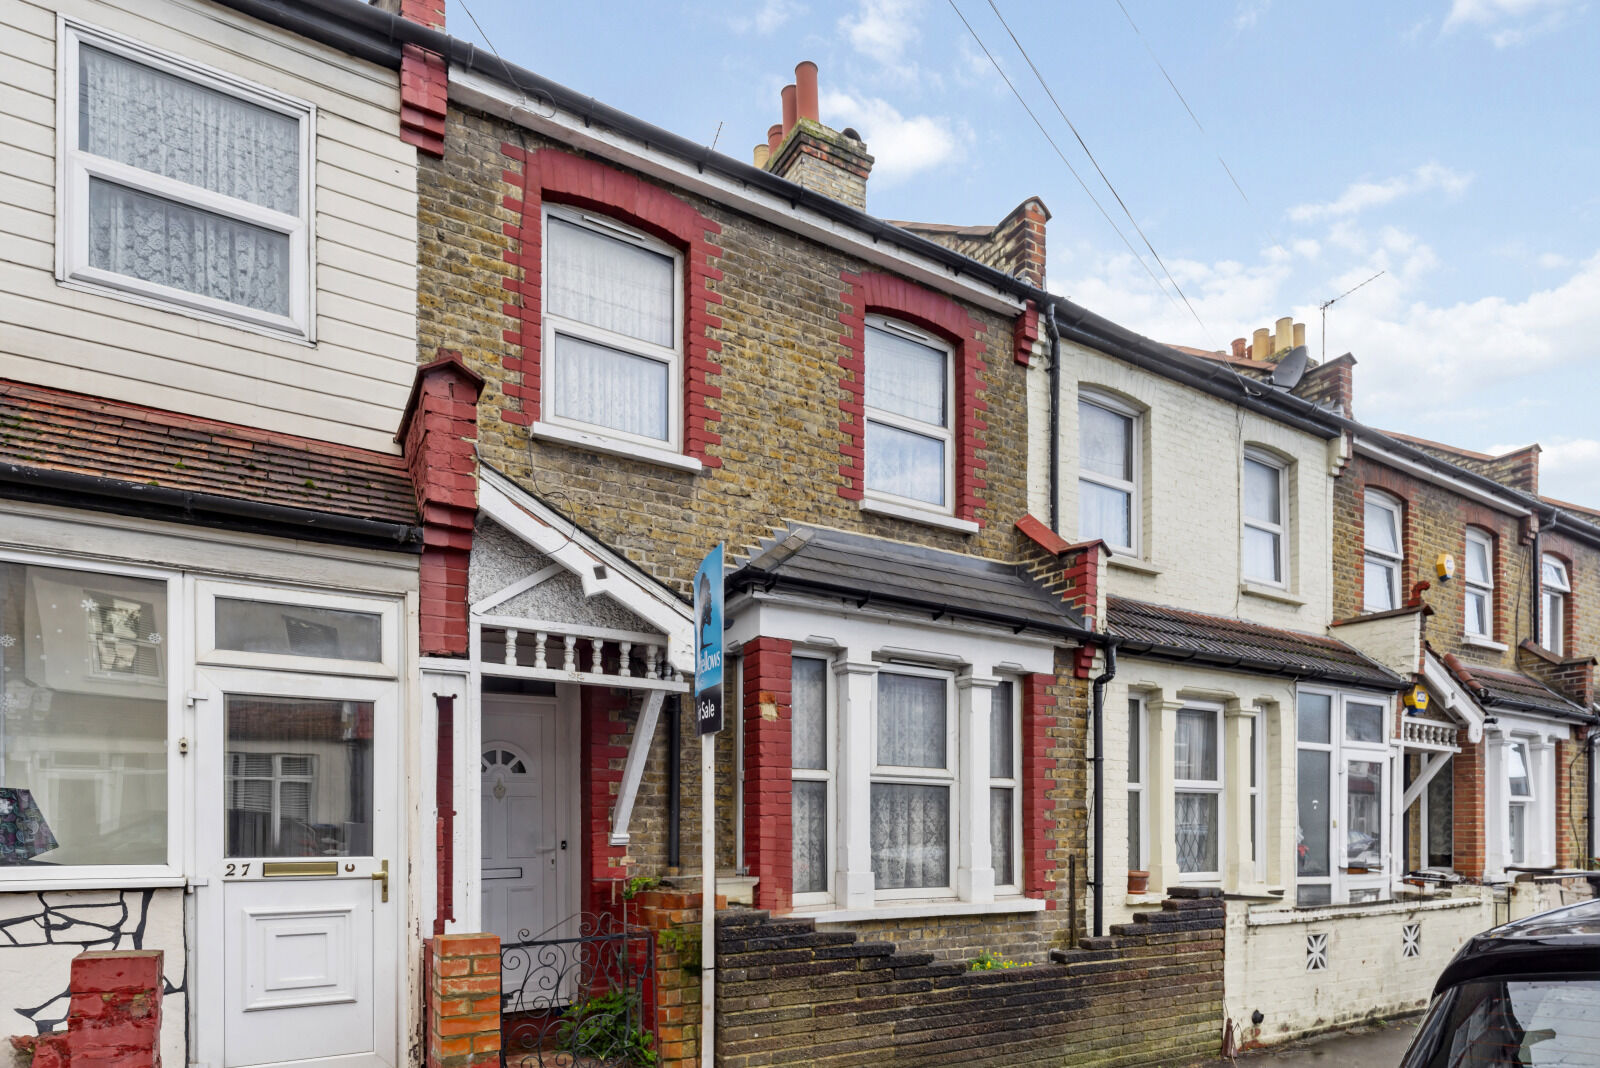 2 bedroom mid terraced house for sale Cecil Road, Croydon, CR0, main image